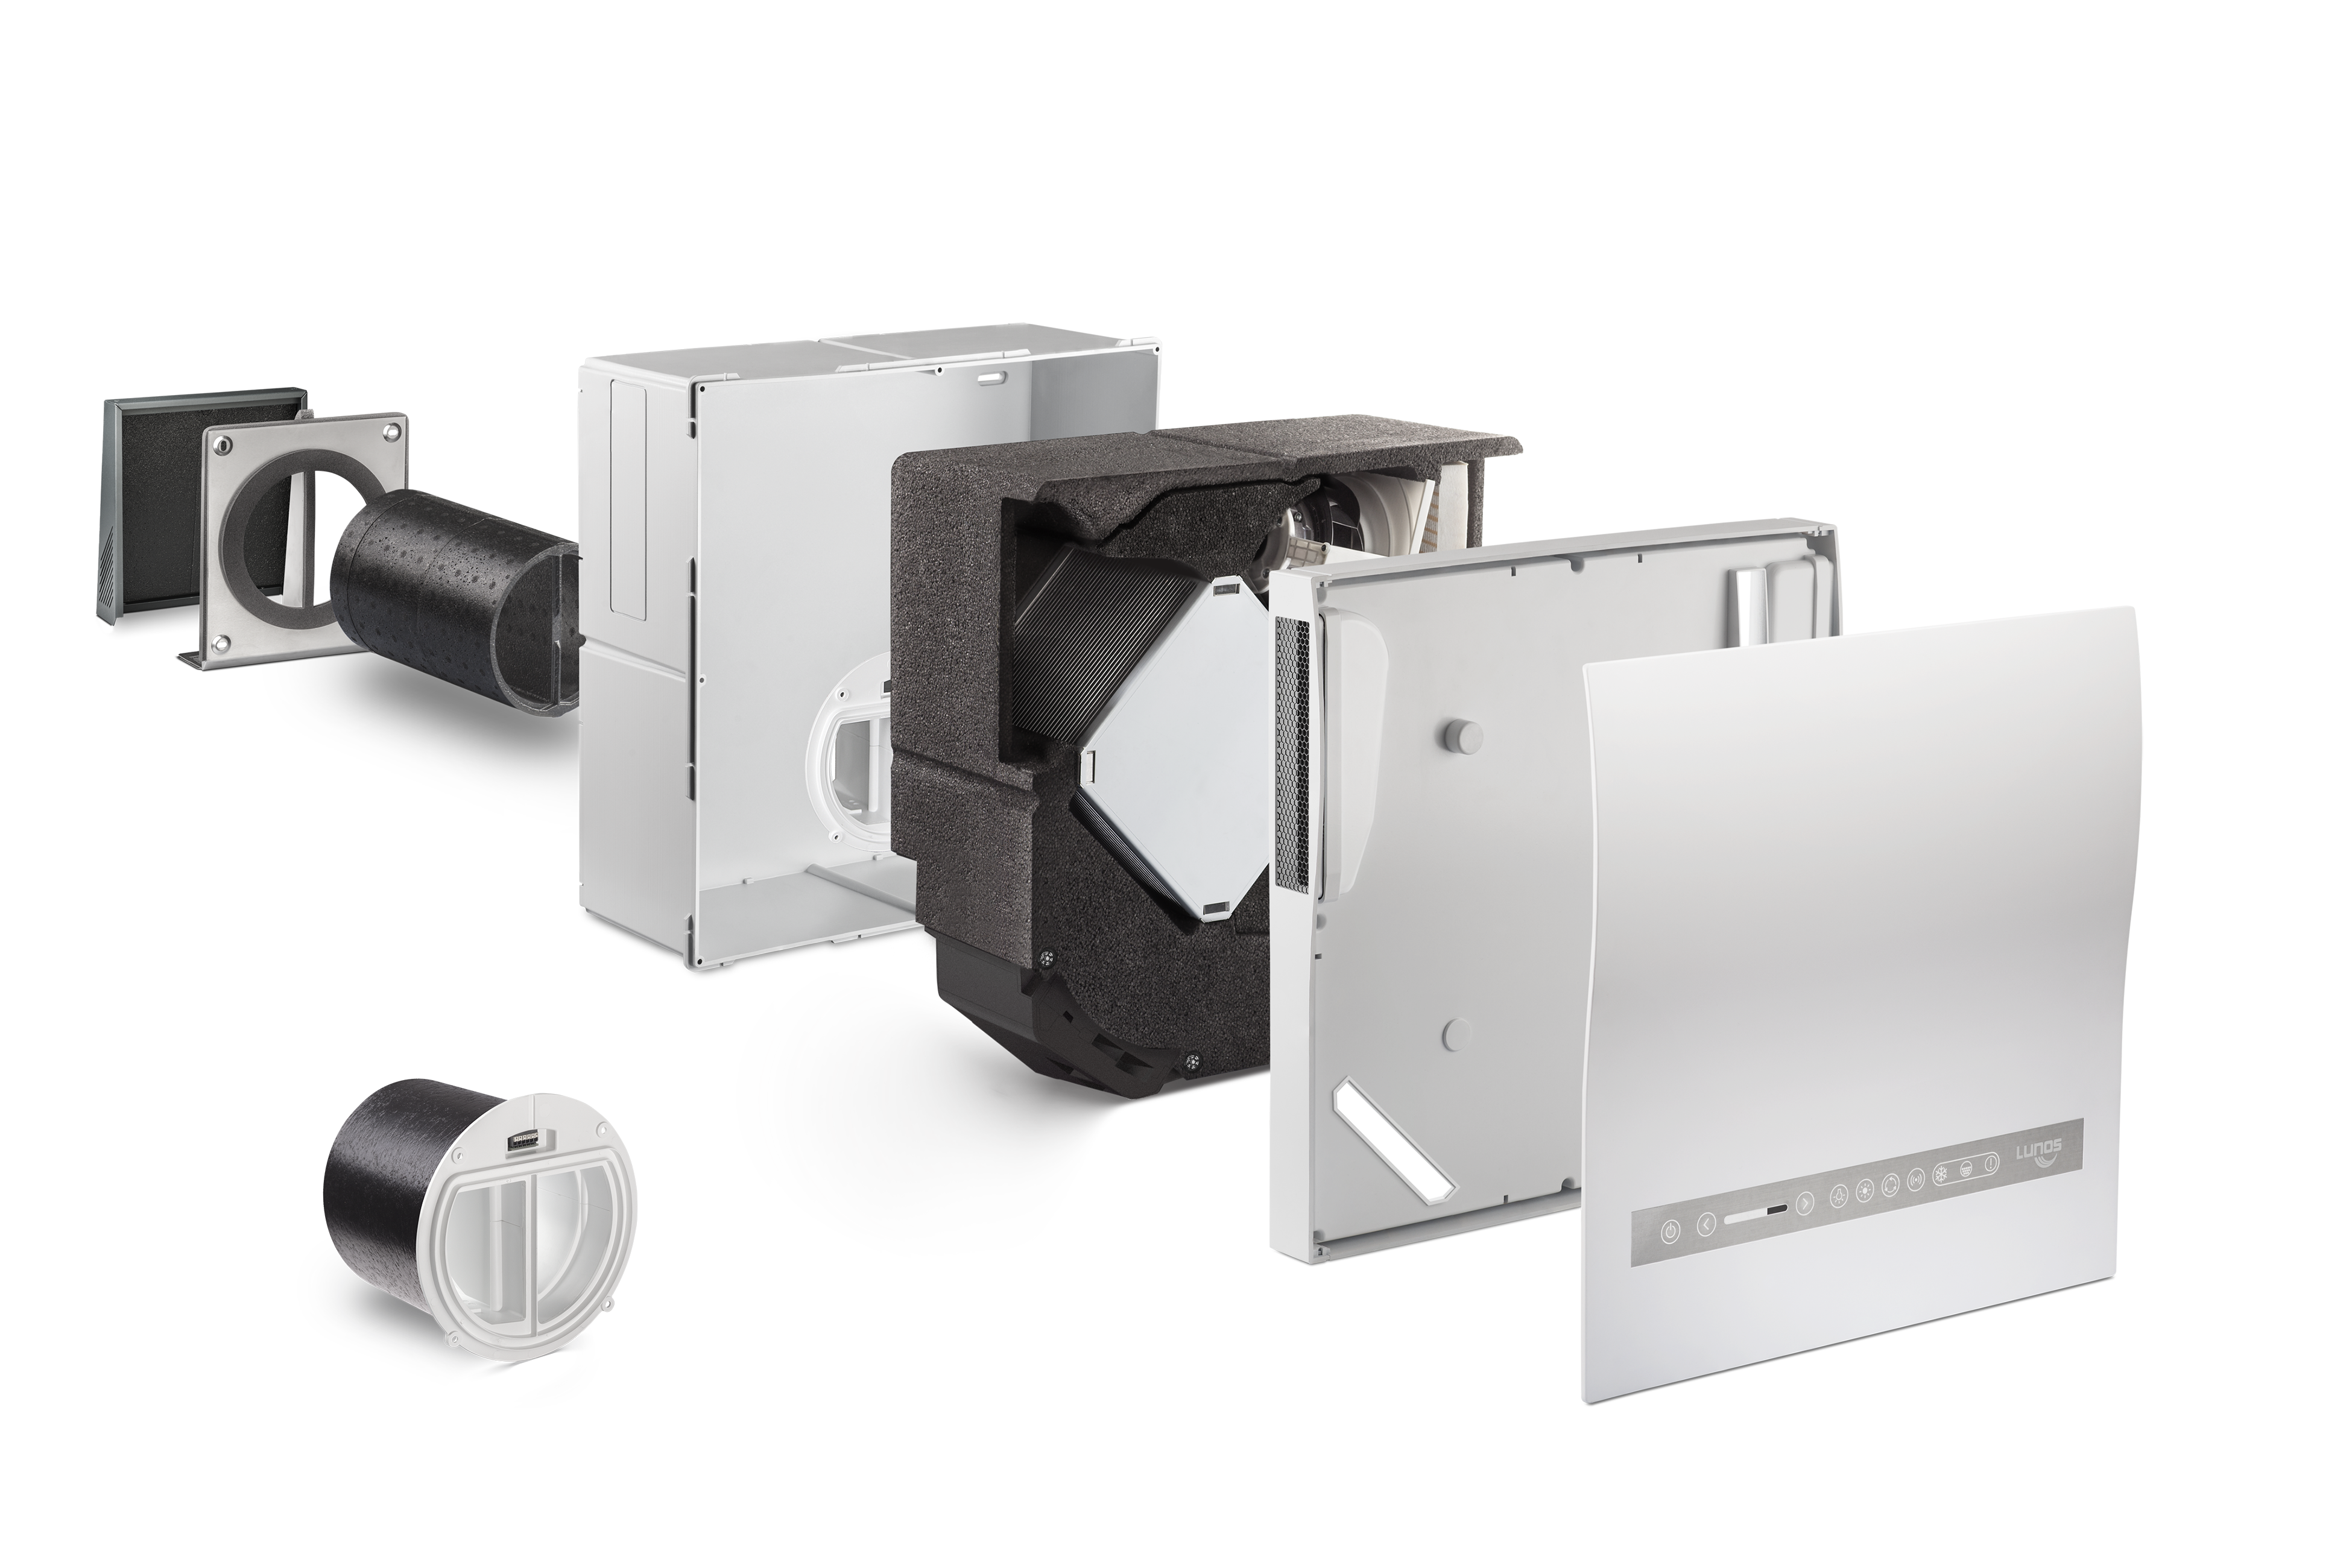 LUNOS Nexxt Decentralised Energy/Heat Recovery Ventilation Systems